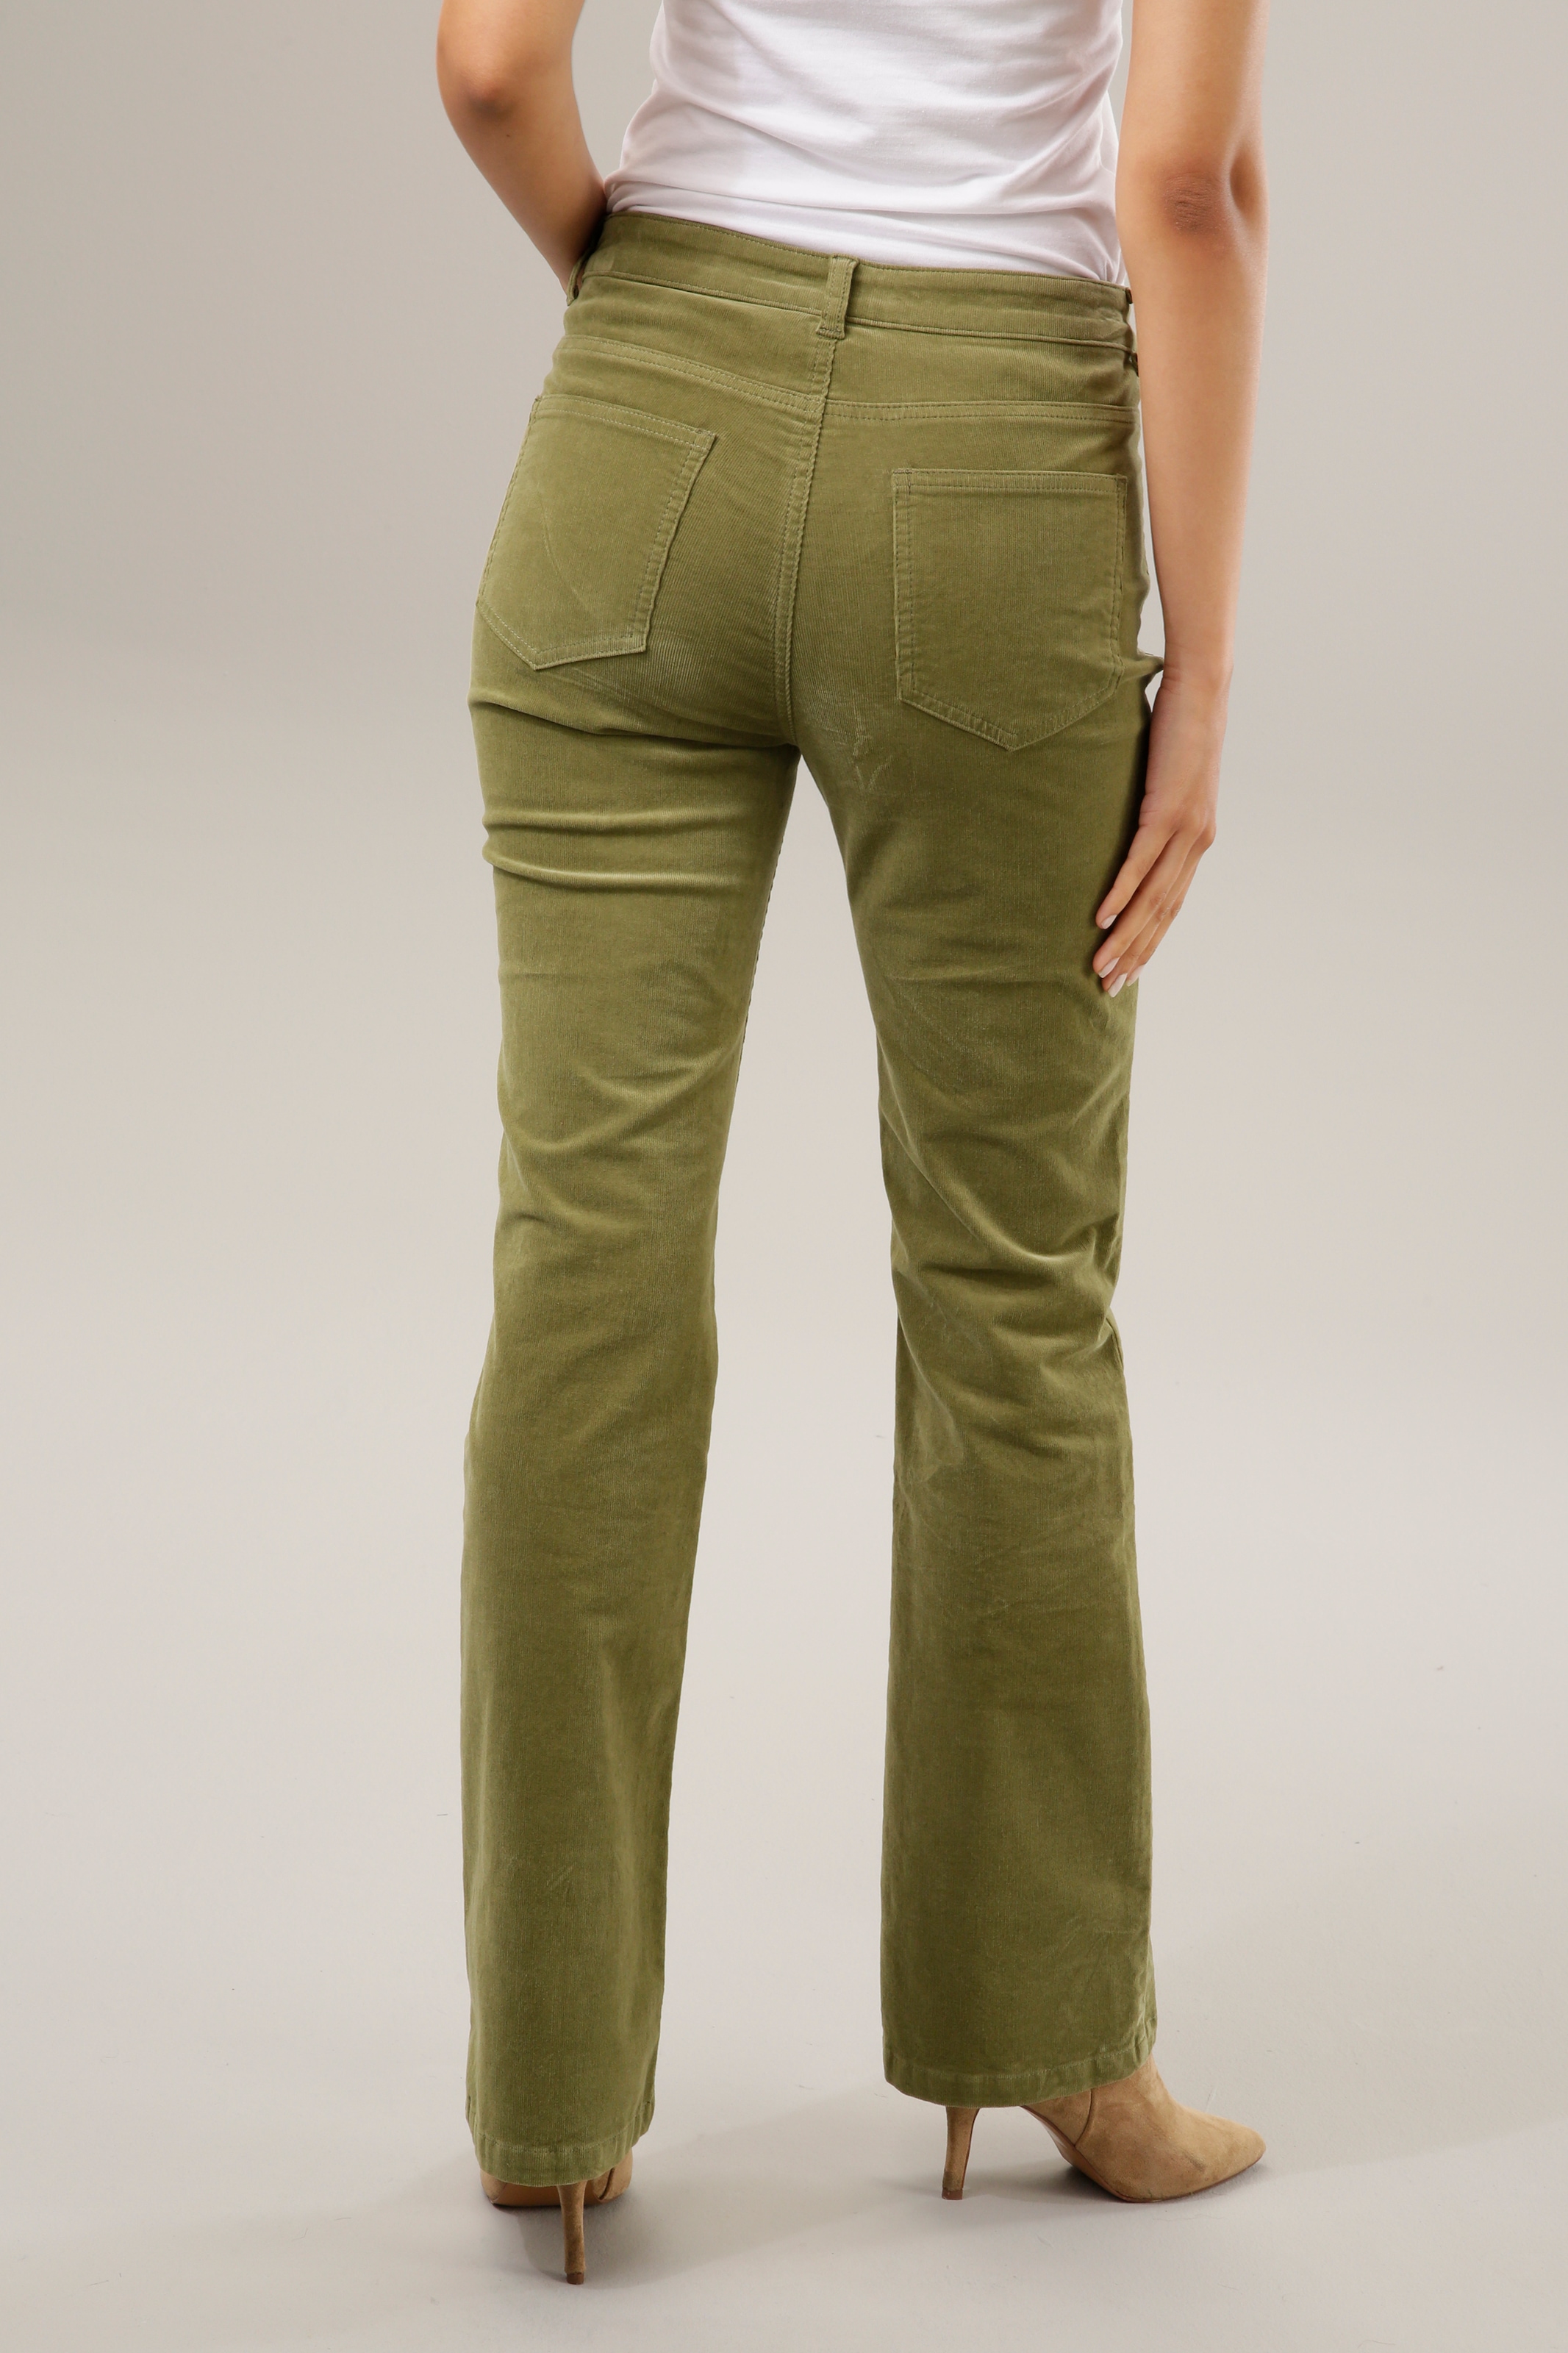 Aniston CASUAL Cordhose, in trendiger Bootcut-Form